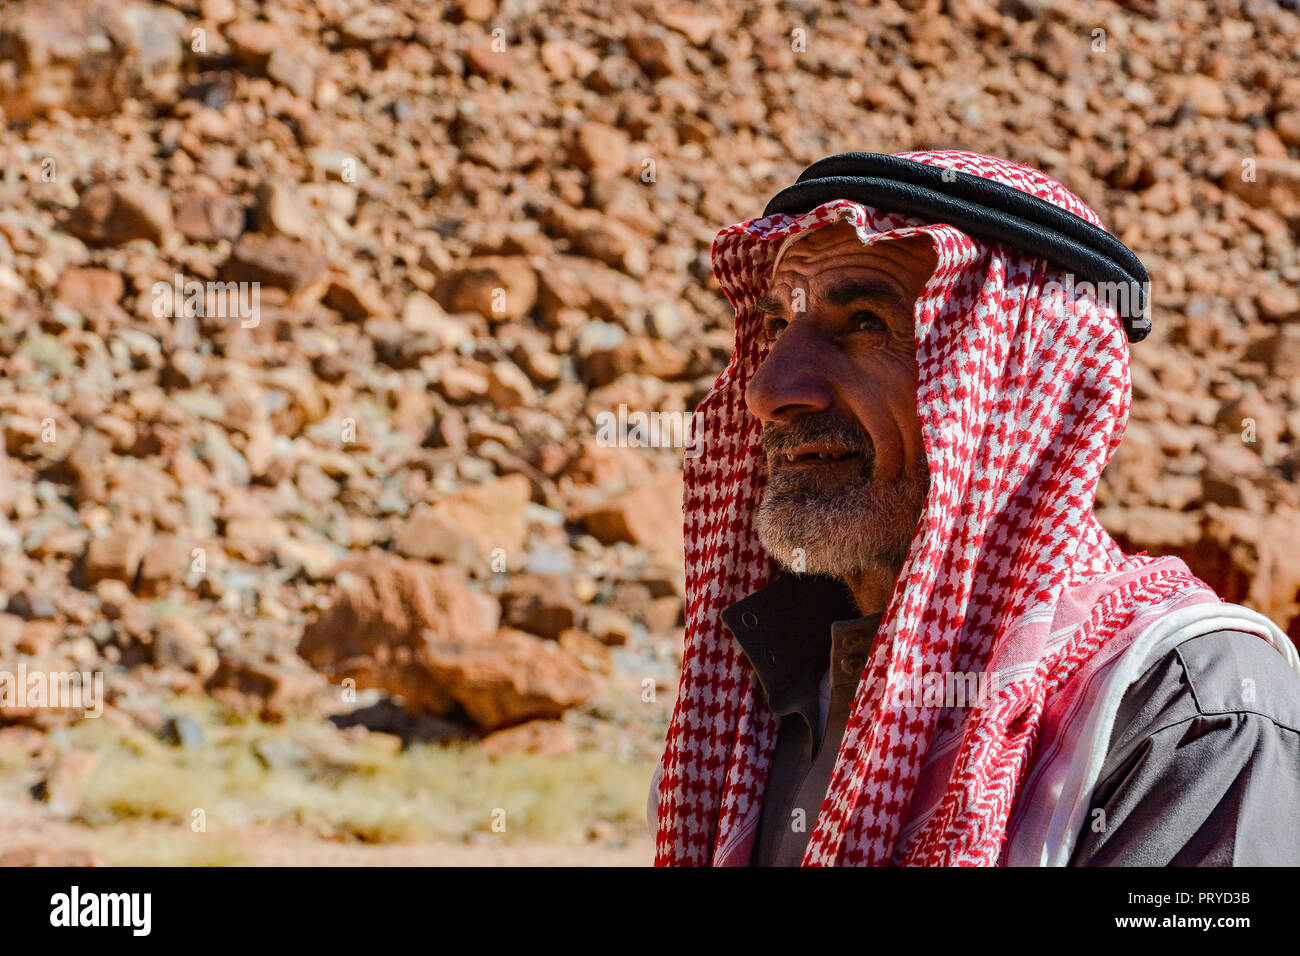 A Wadi Rum Bedouin posing for a photo in the desert. Photo taken at an encampment in the desert outside the village of Wadi Rum. Stock Photo